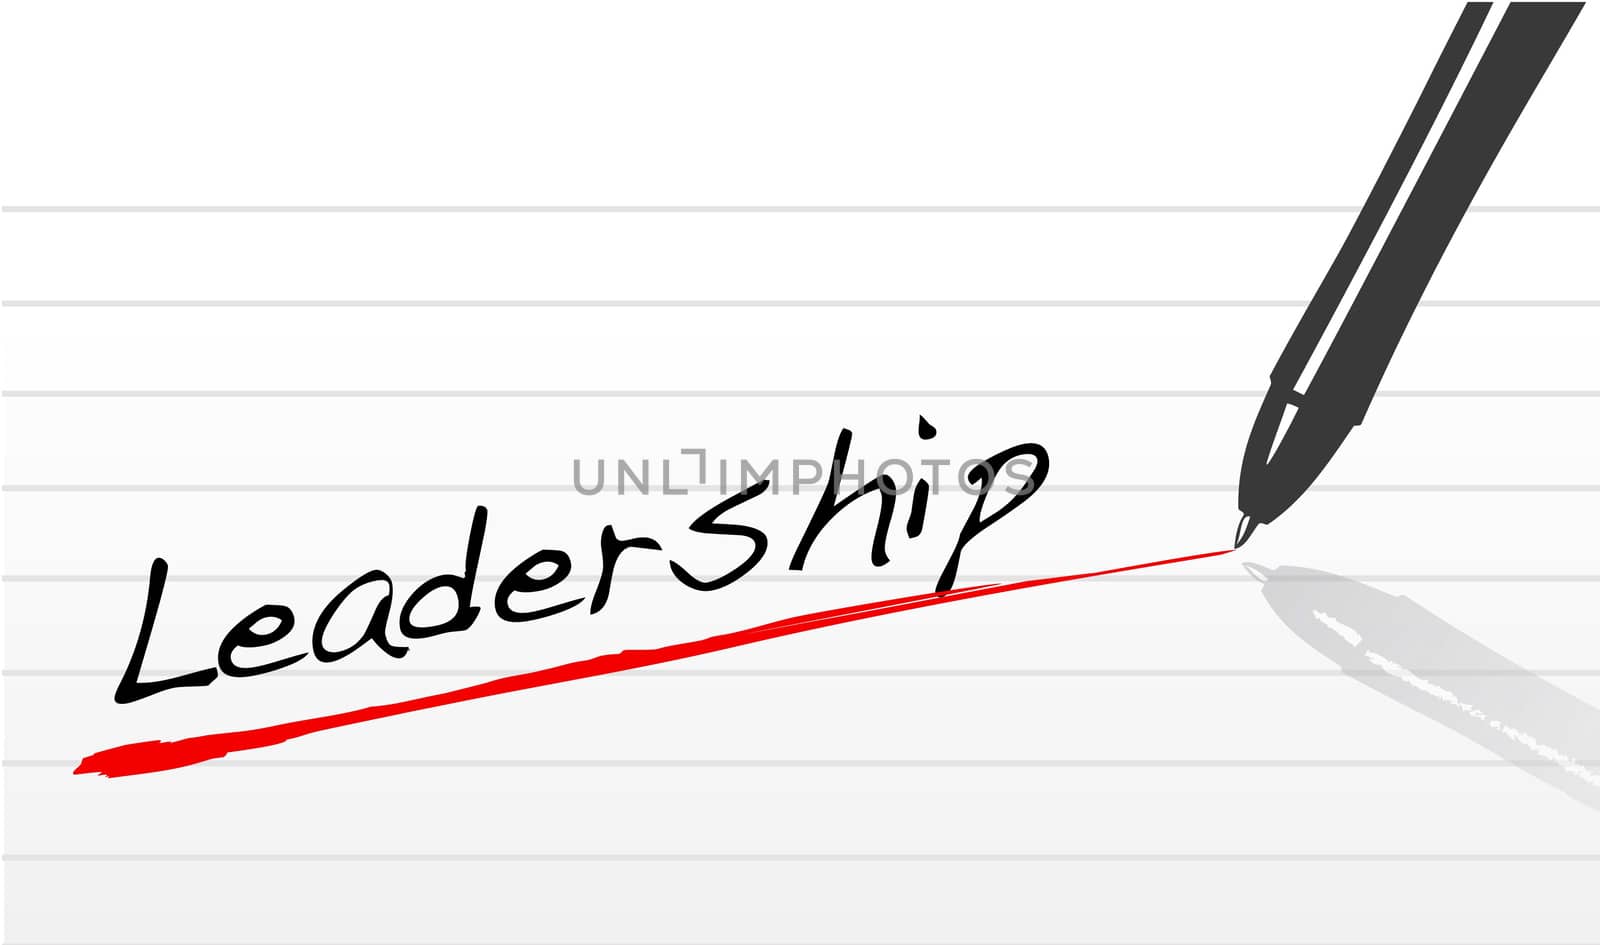 Leadership underlined in pen on a white background